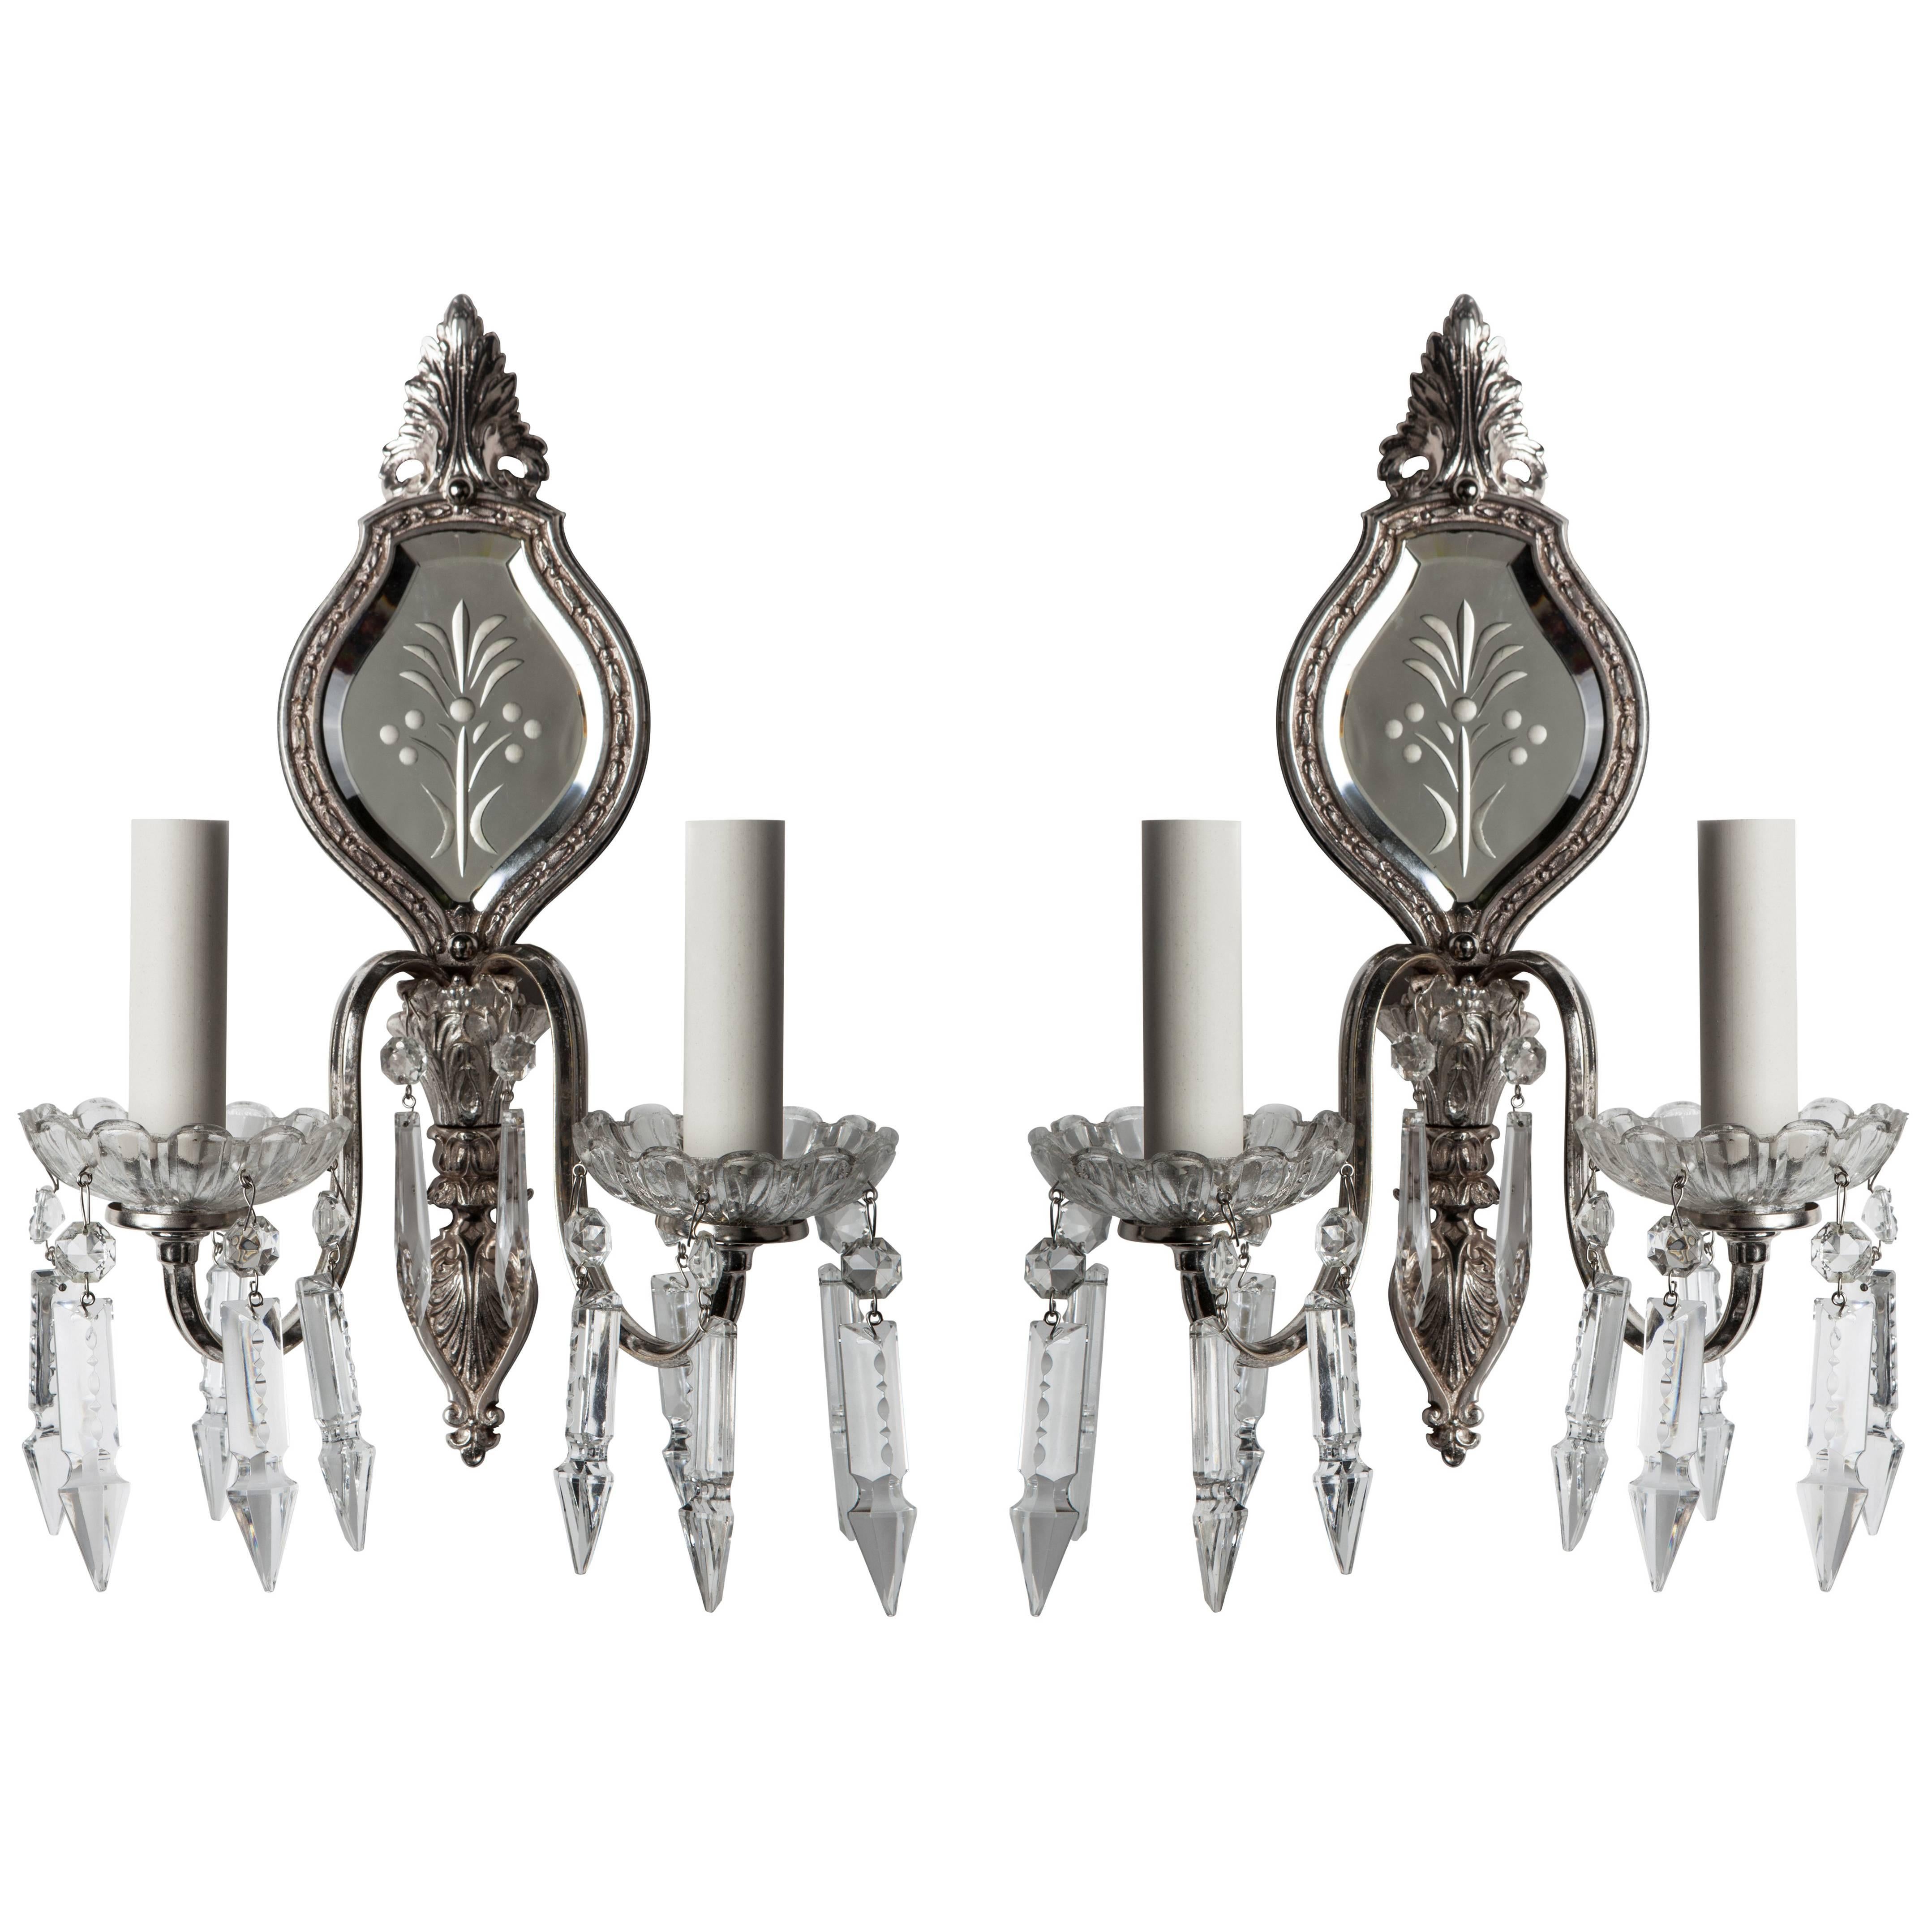 Silverplate Wheel-Cut Mirrorback Sconces with Crystal Spear Prisms, Circa 1930s